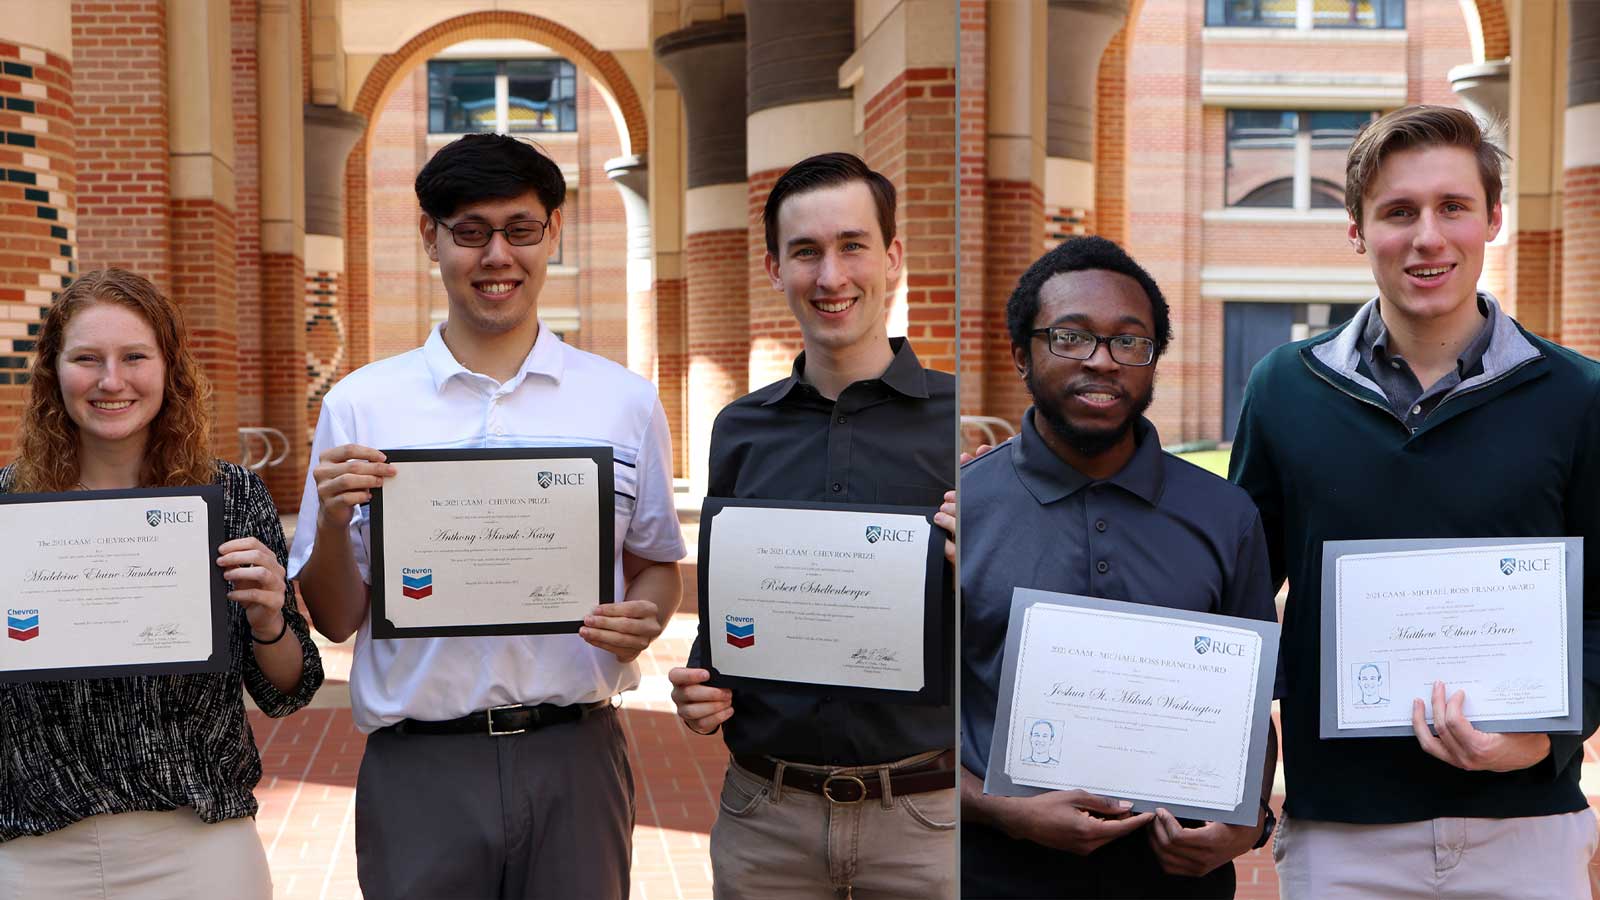 Five students standing holding awards